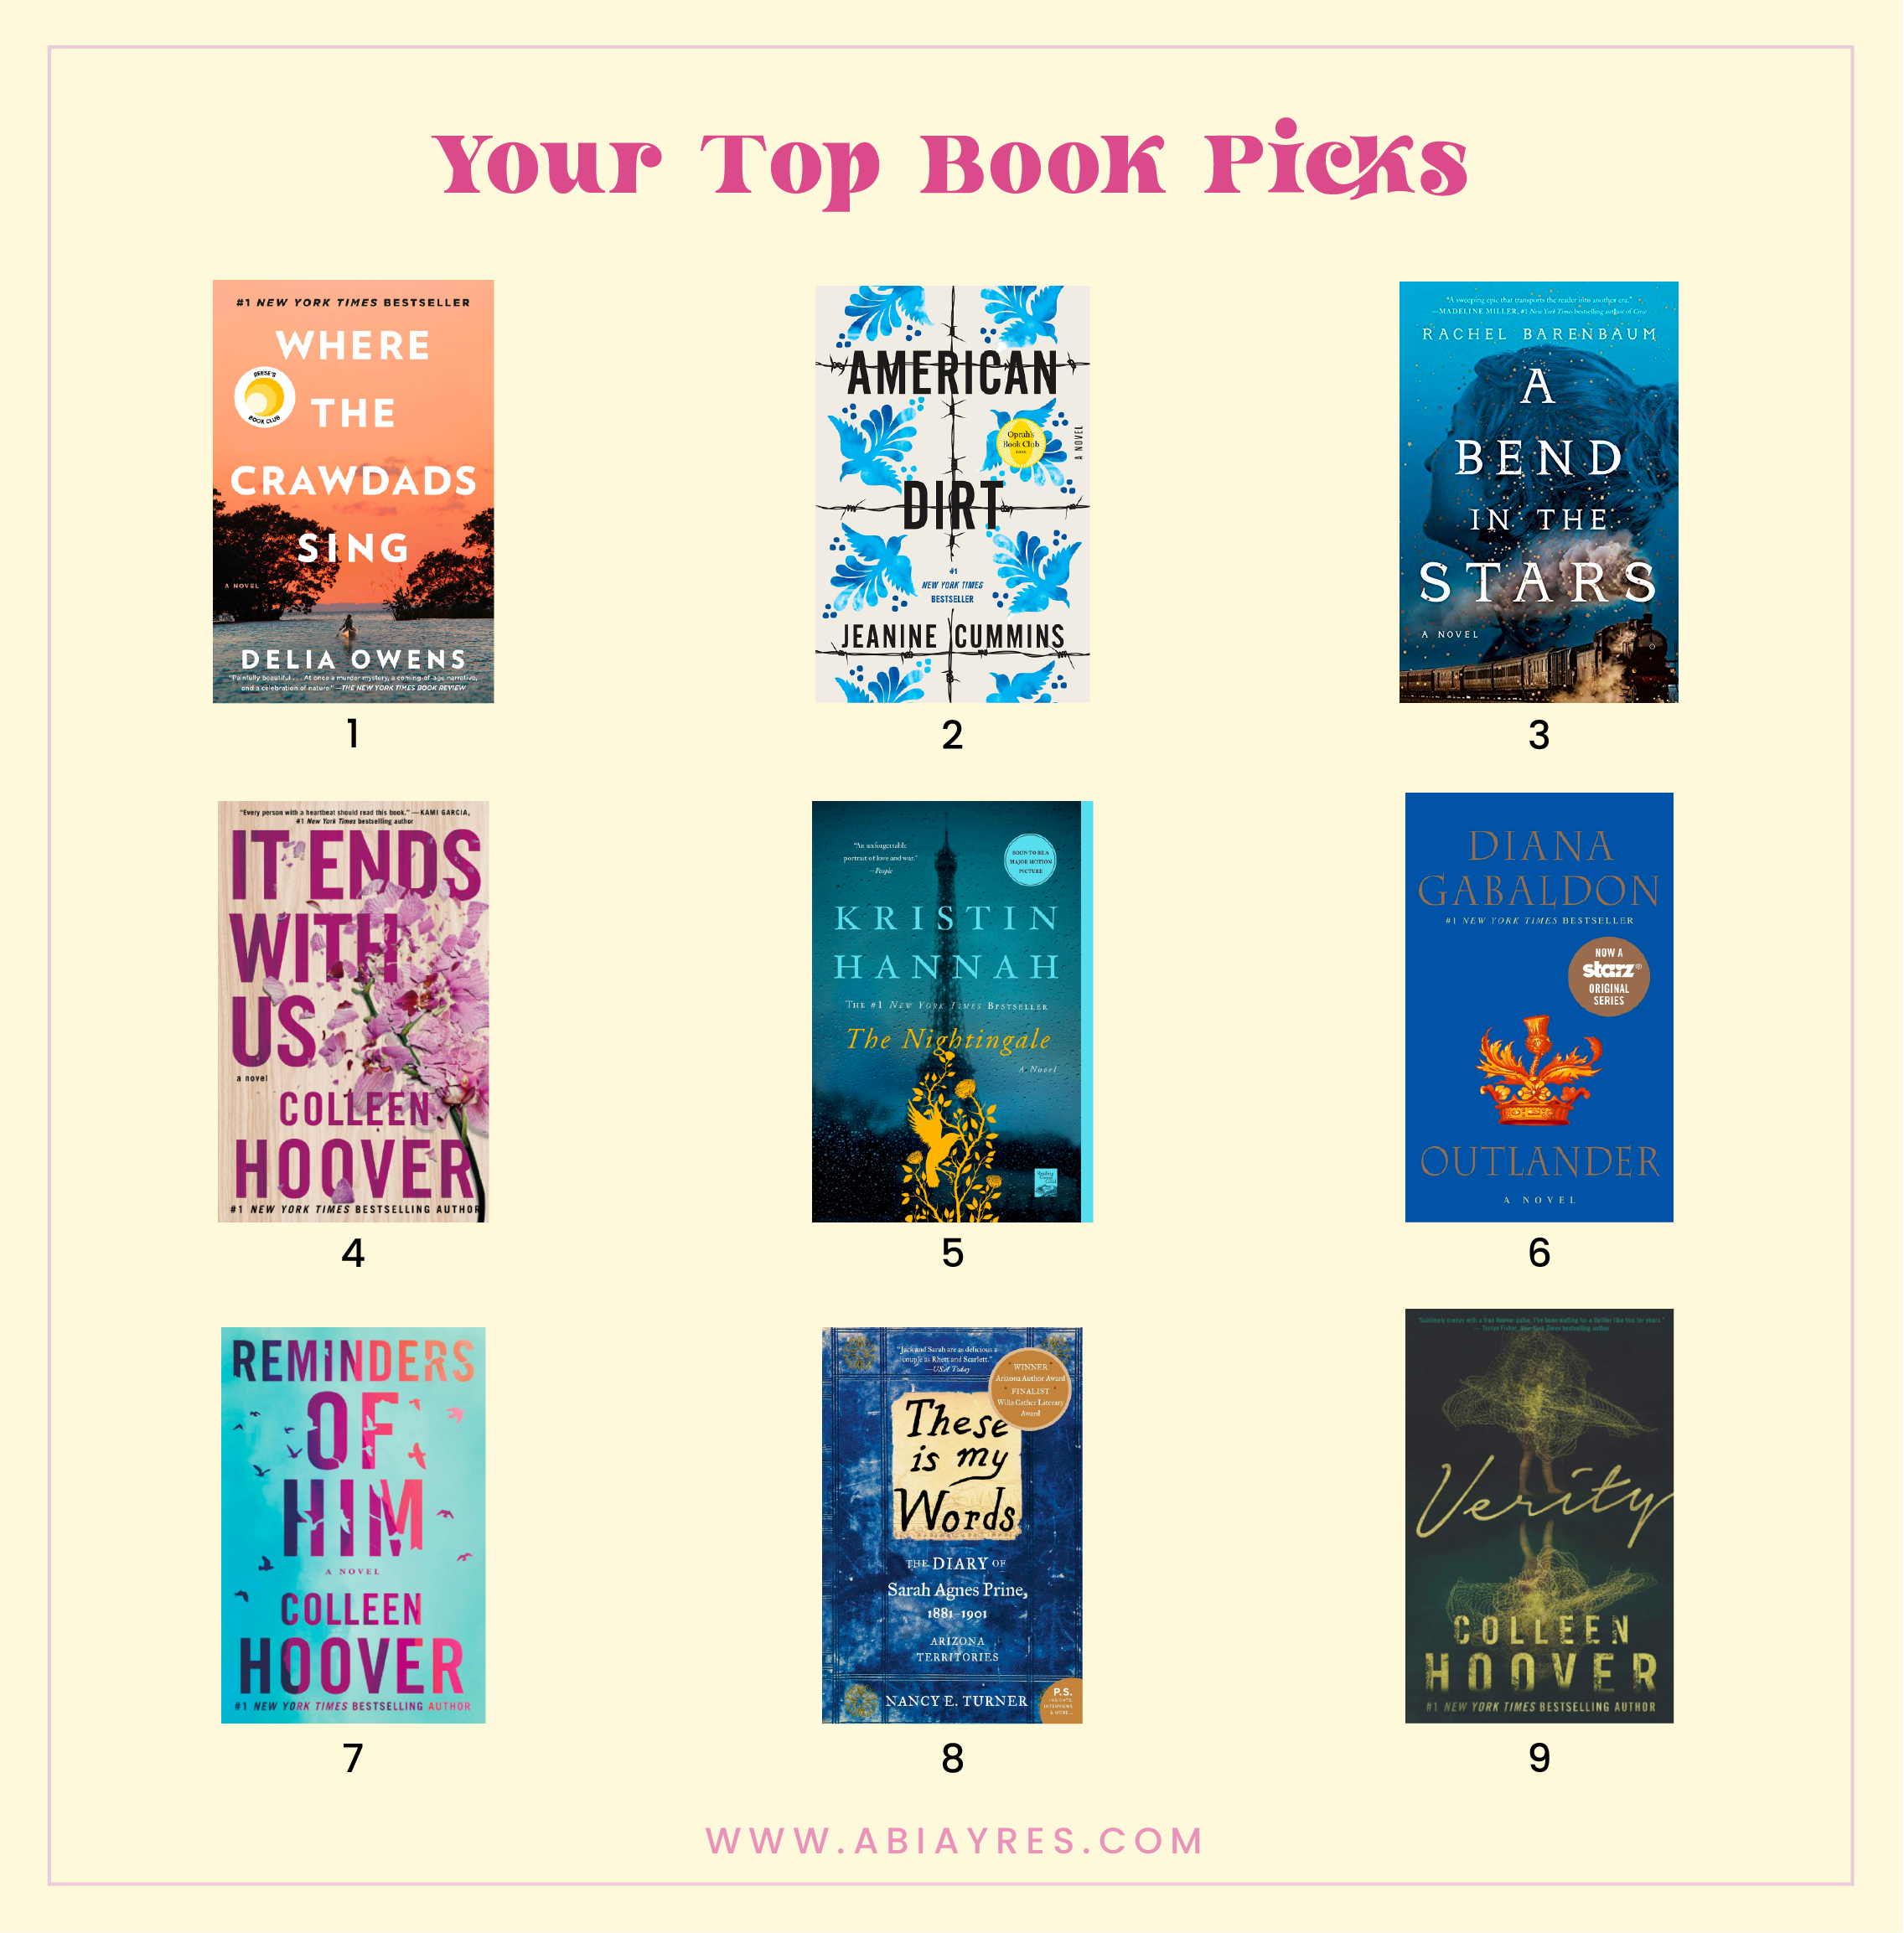 All The Best Books - Recommended by You!